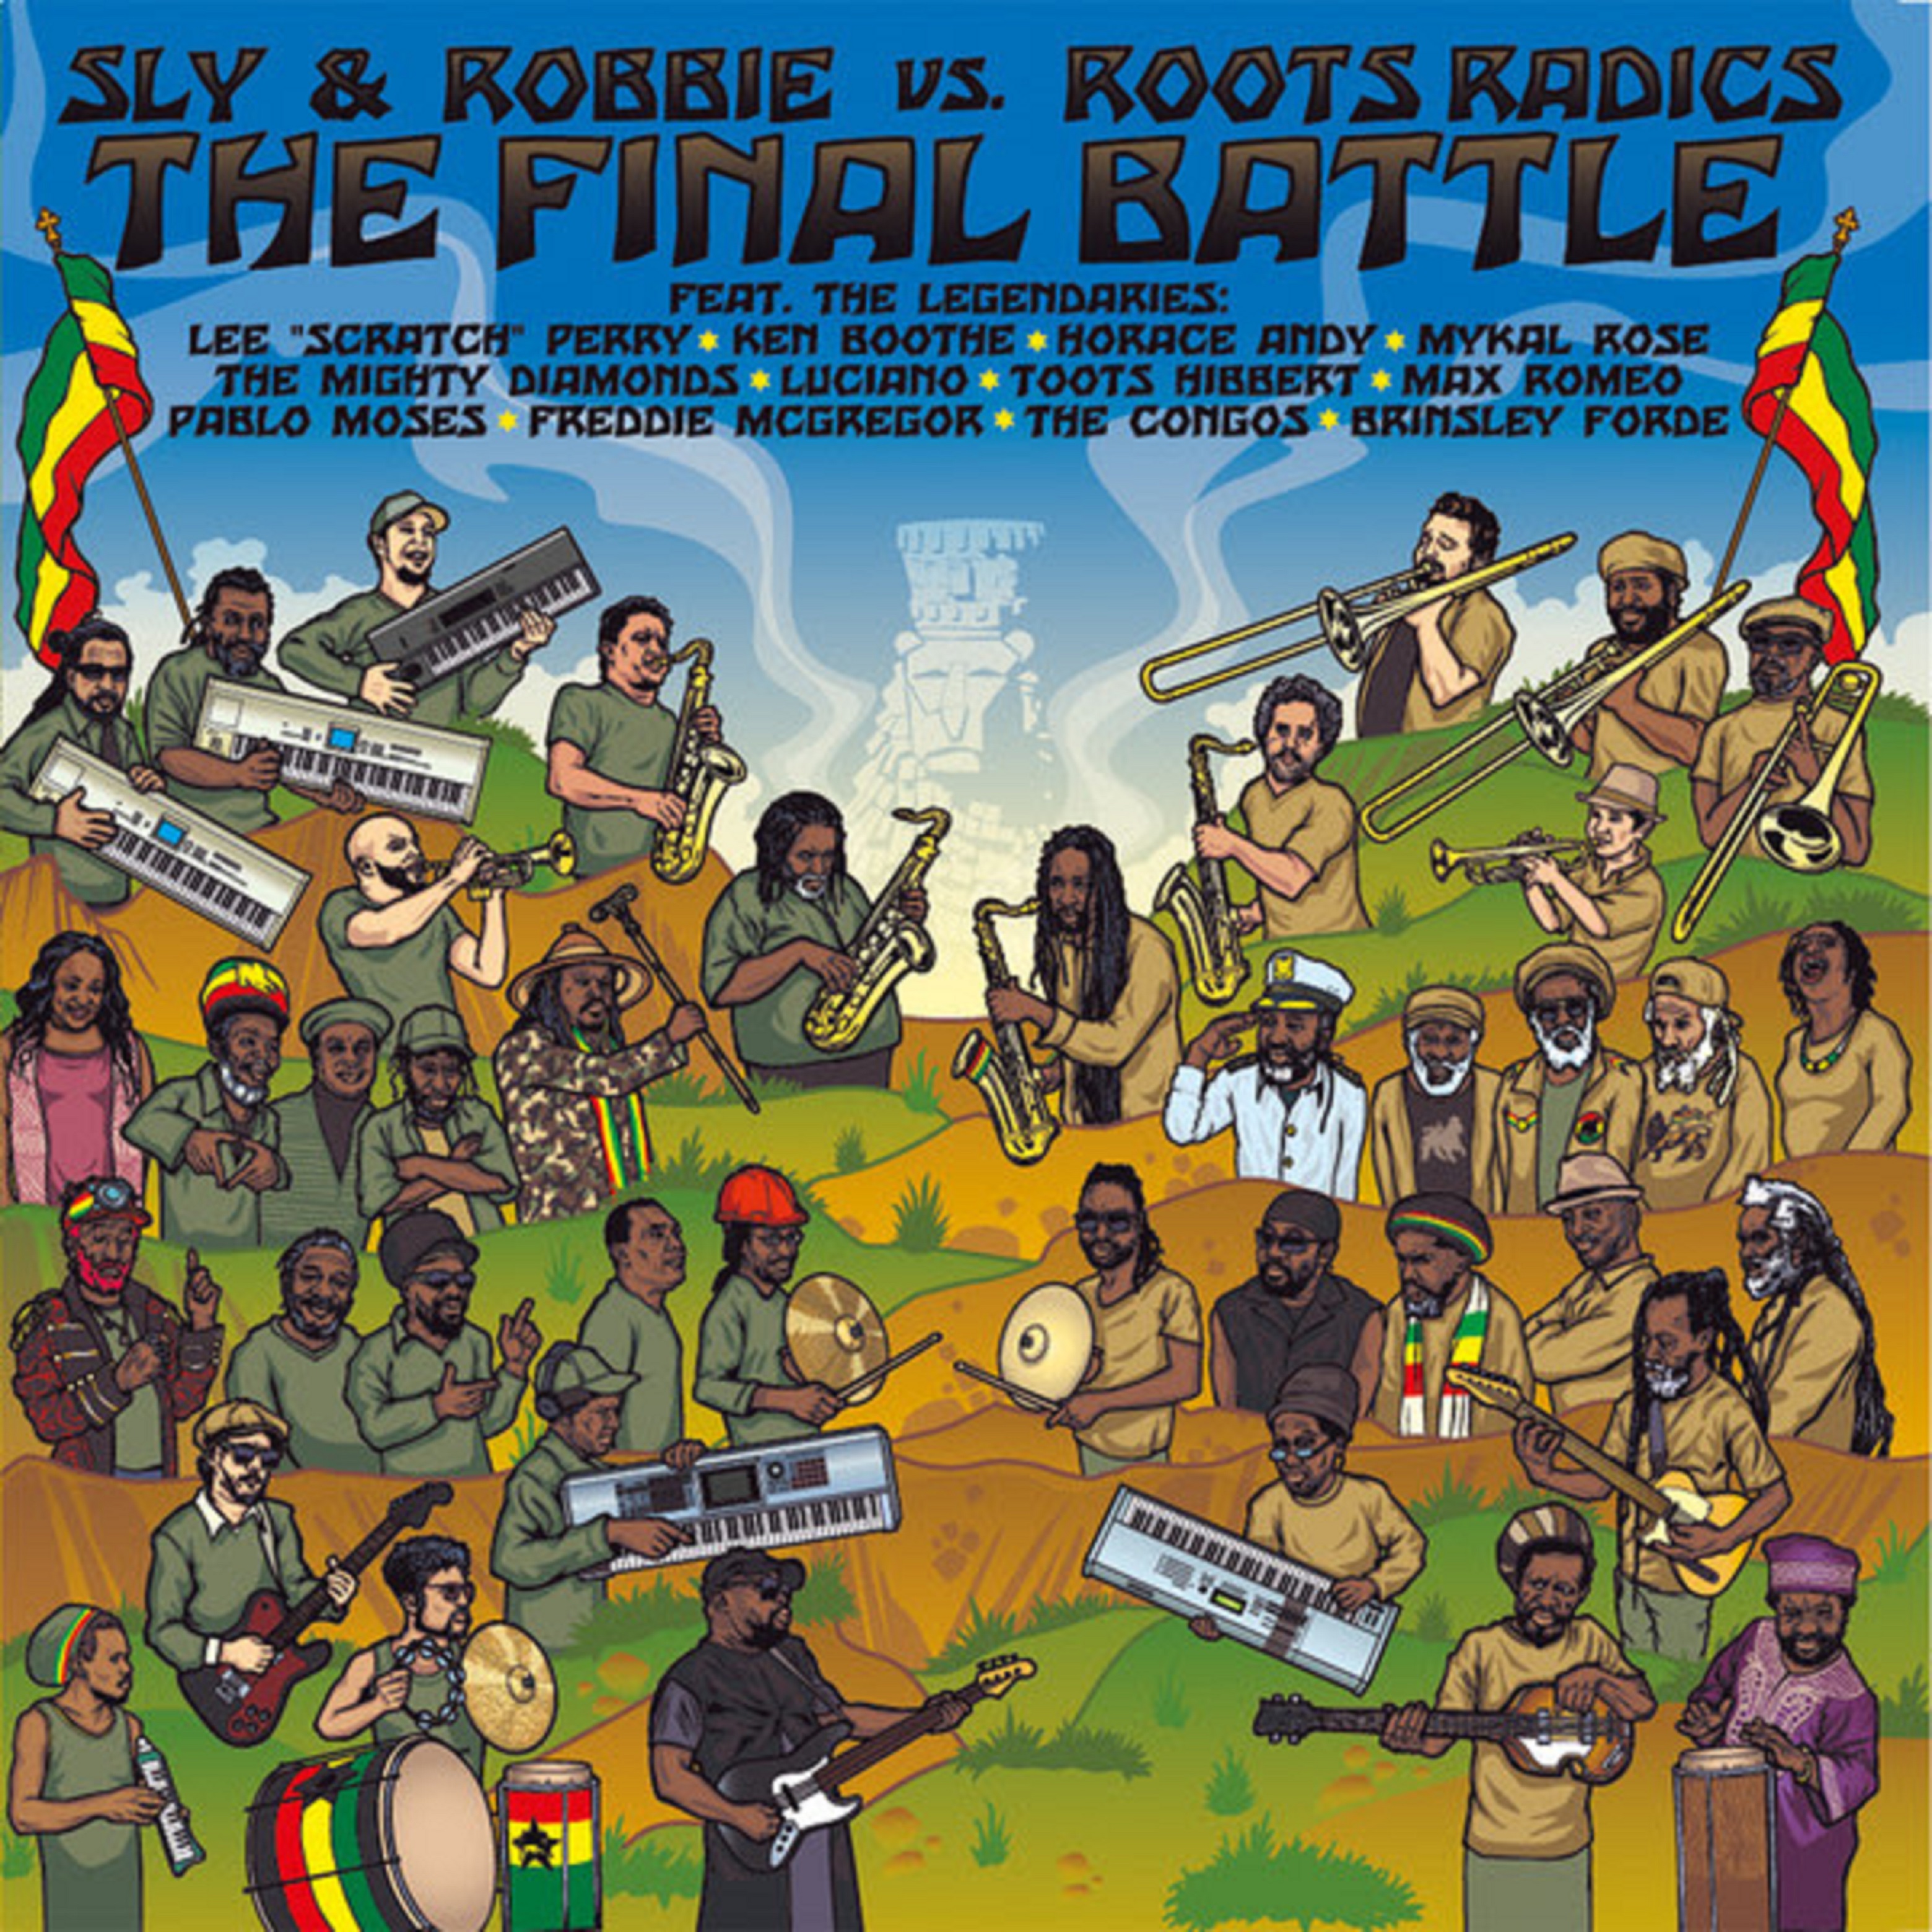 Toots and the Maytals & Roots Radics New Video "To You" Out Now!